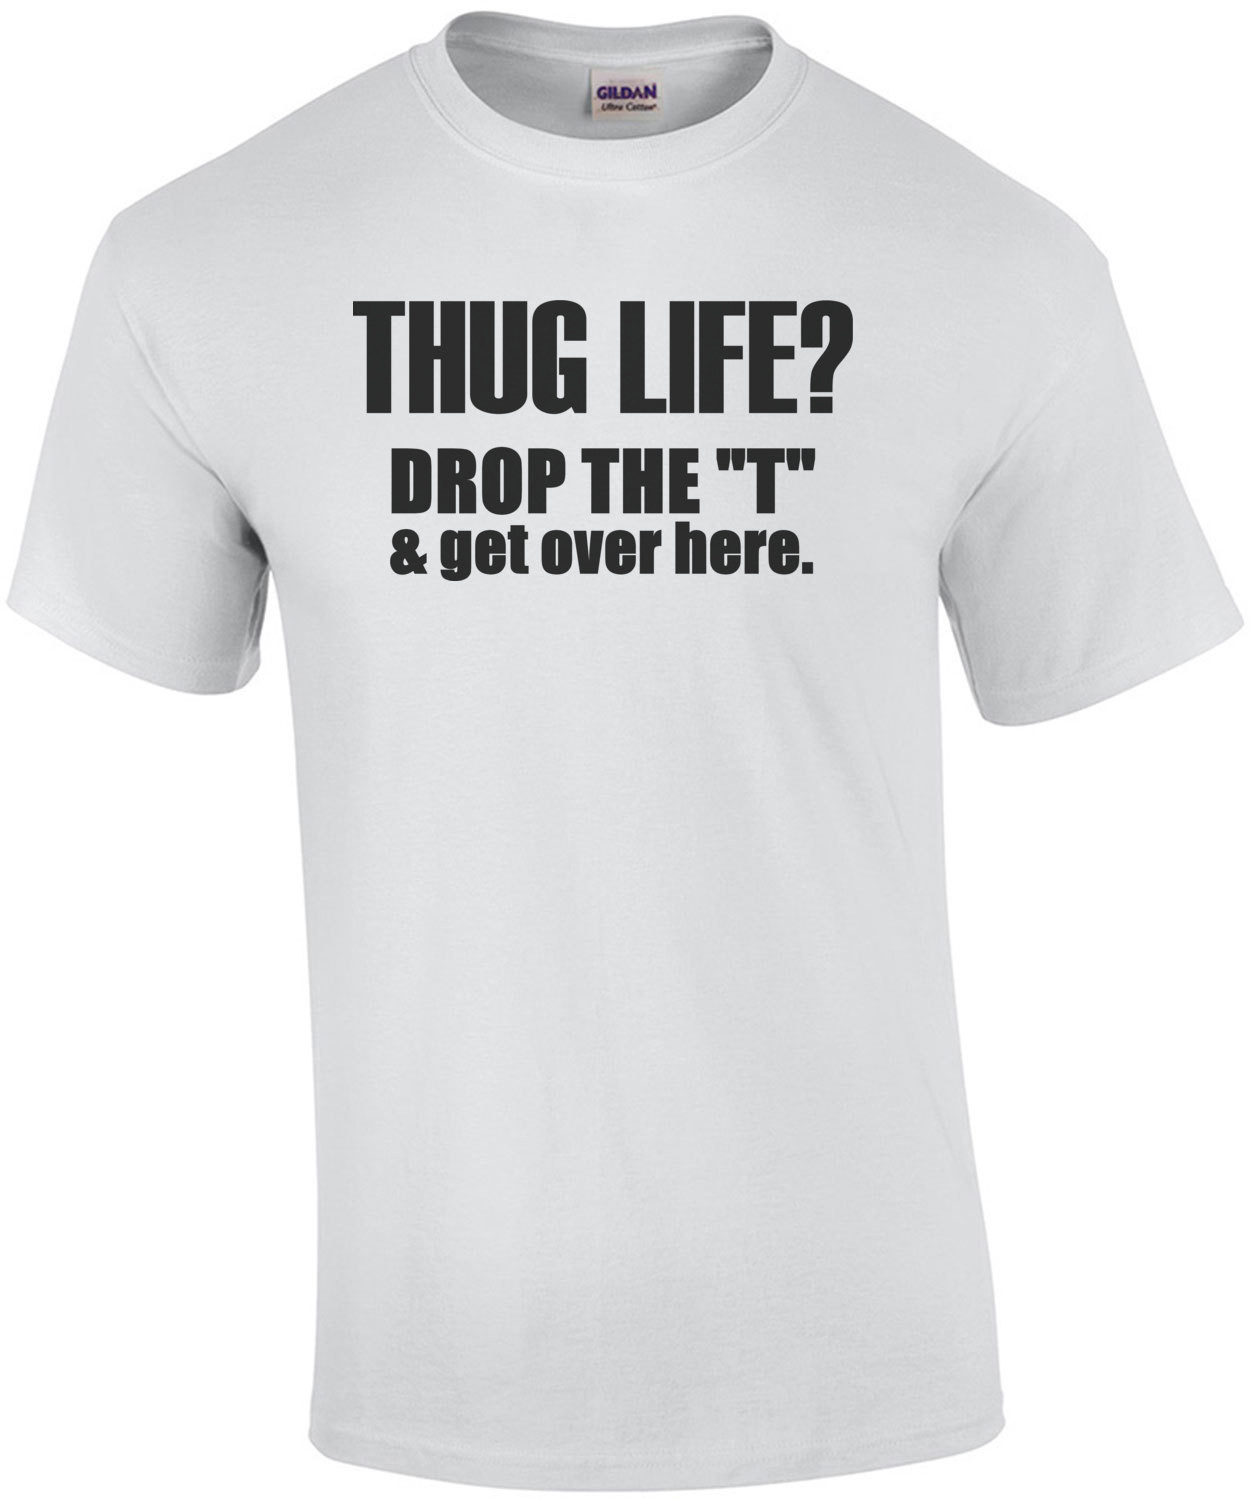 Thug life? Drop the T and get over here.